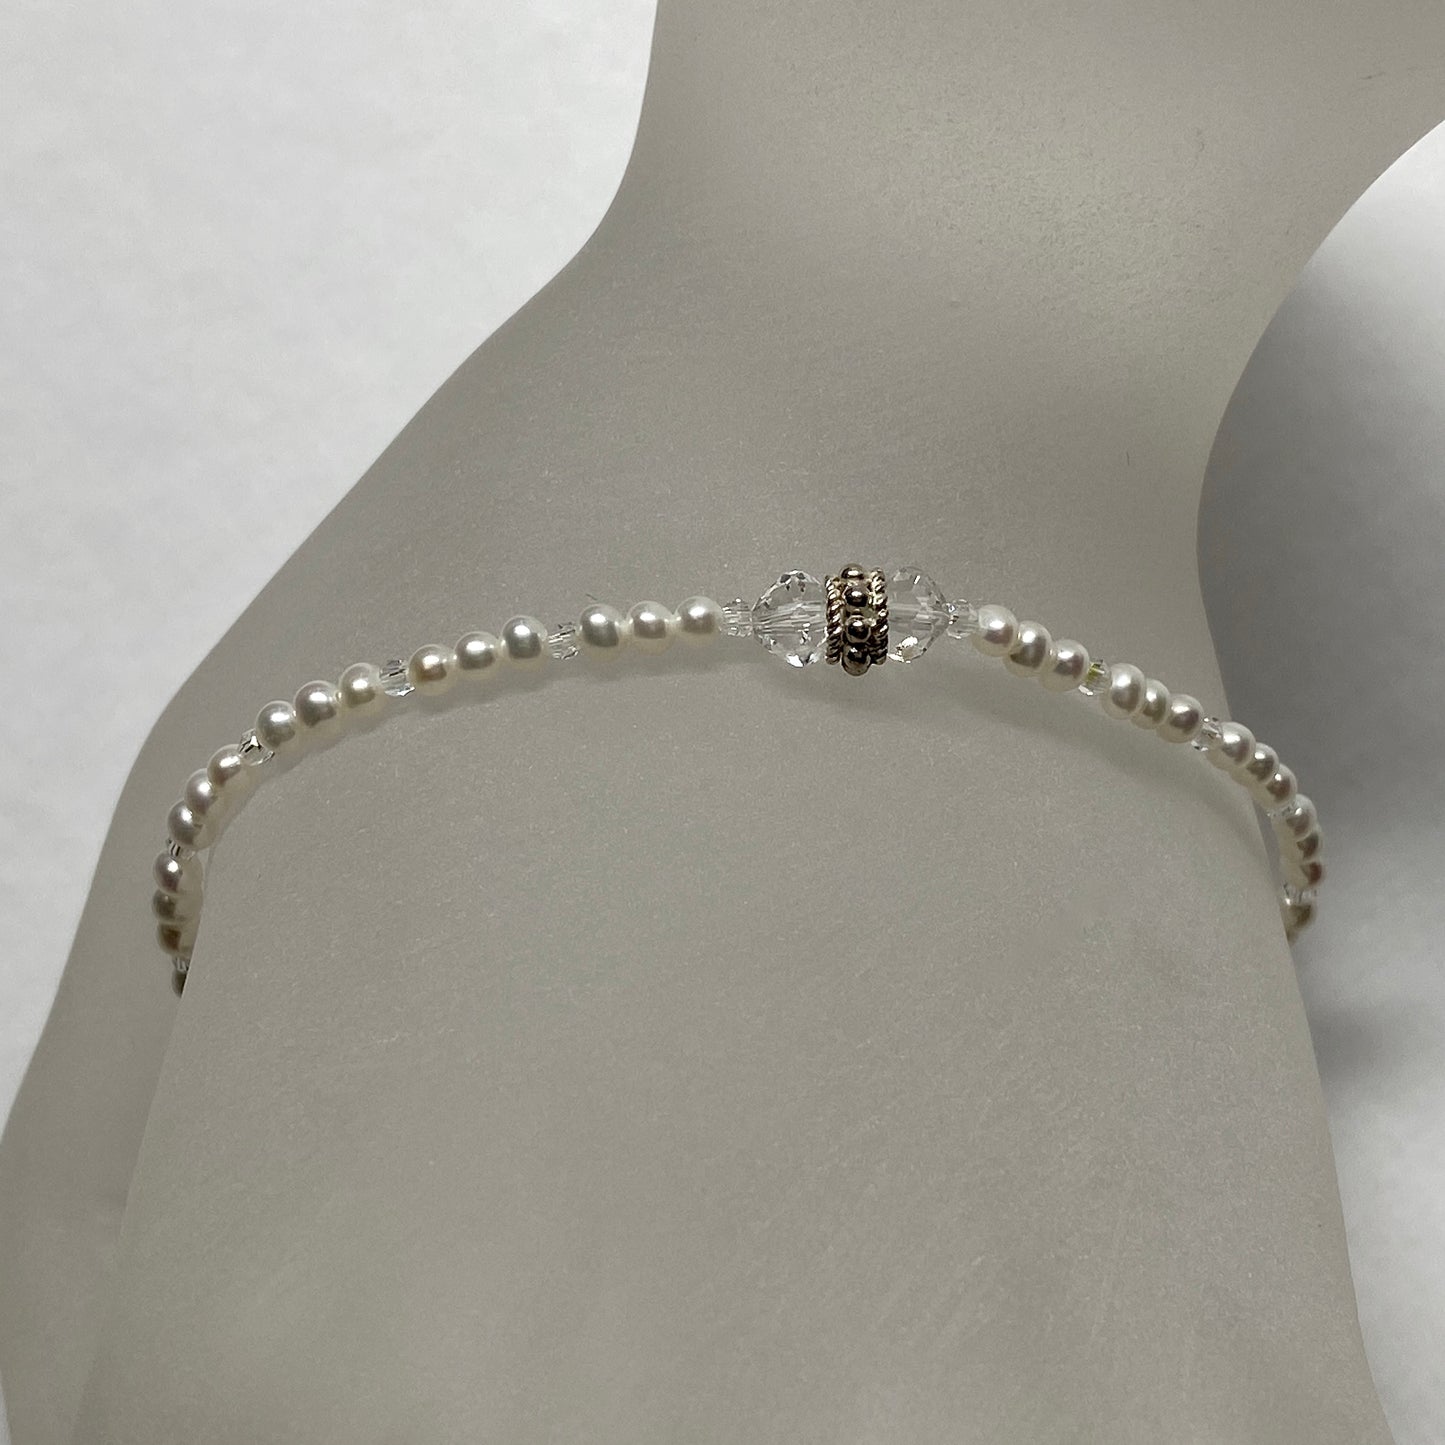 Arpaia white baby cultured freshwater pearl stretch bracelet with Swarovski crystal beads